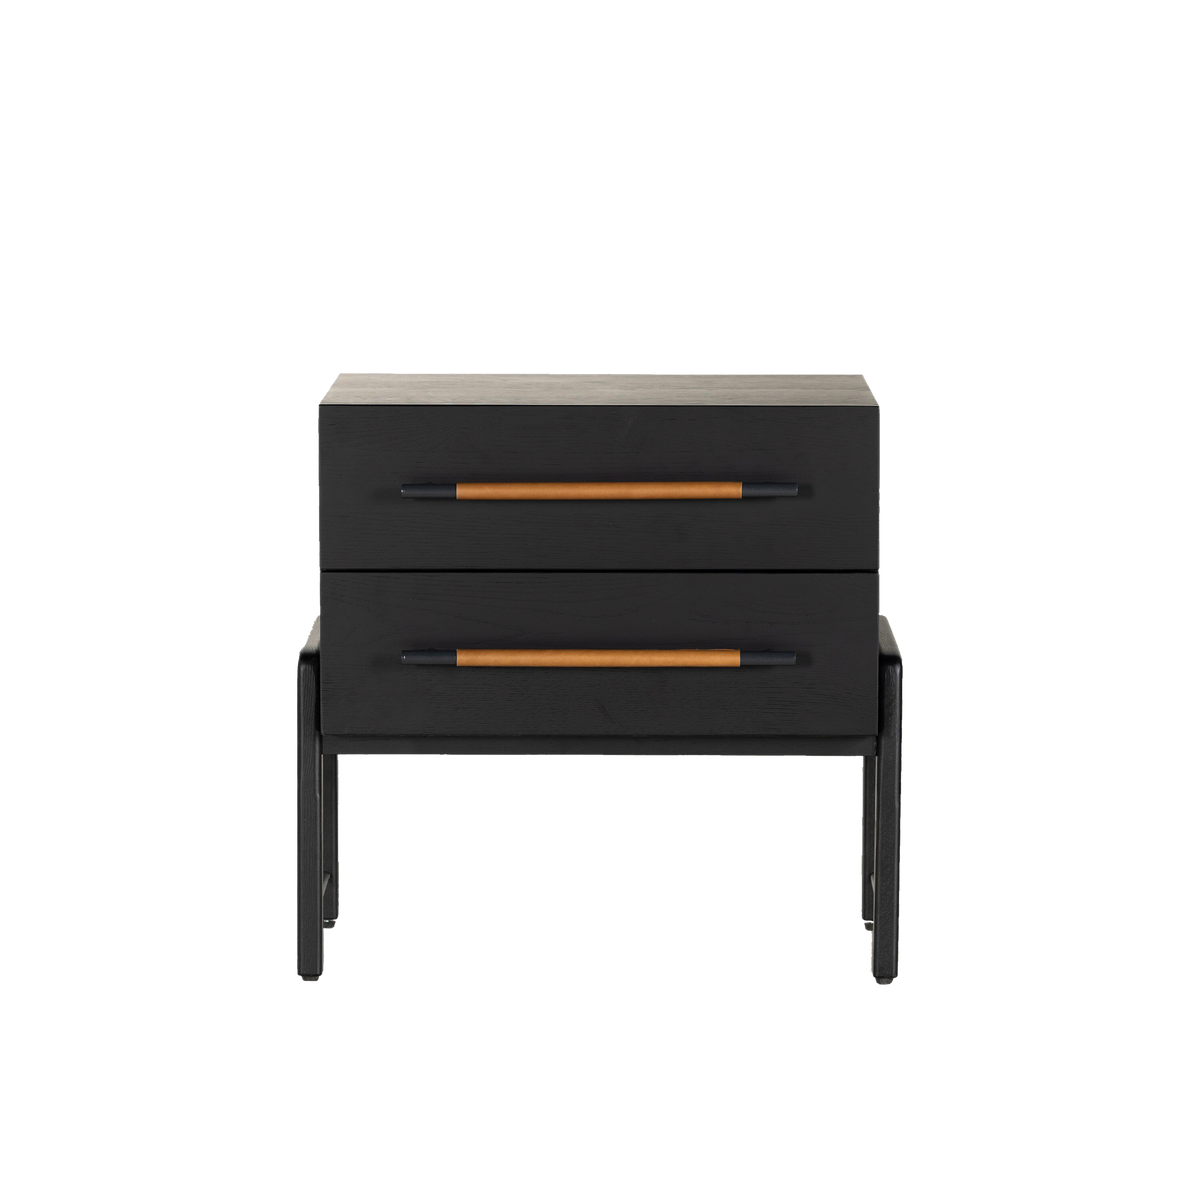 Crafted in a dark ebony-finished oak, the Buckley Nightstand boasts a clean mid-century modern inspired silhouette.